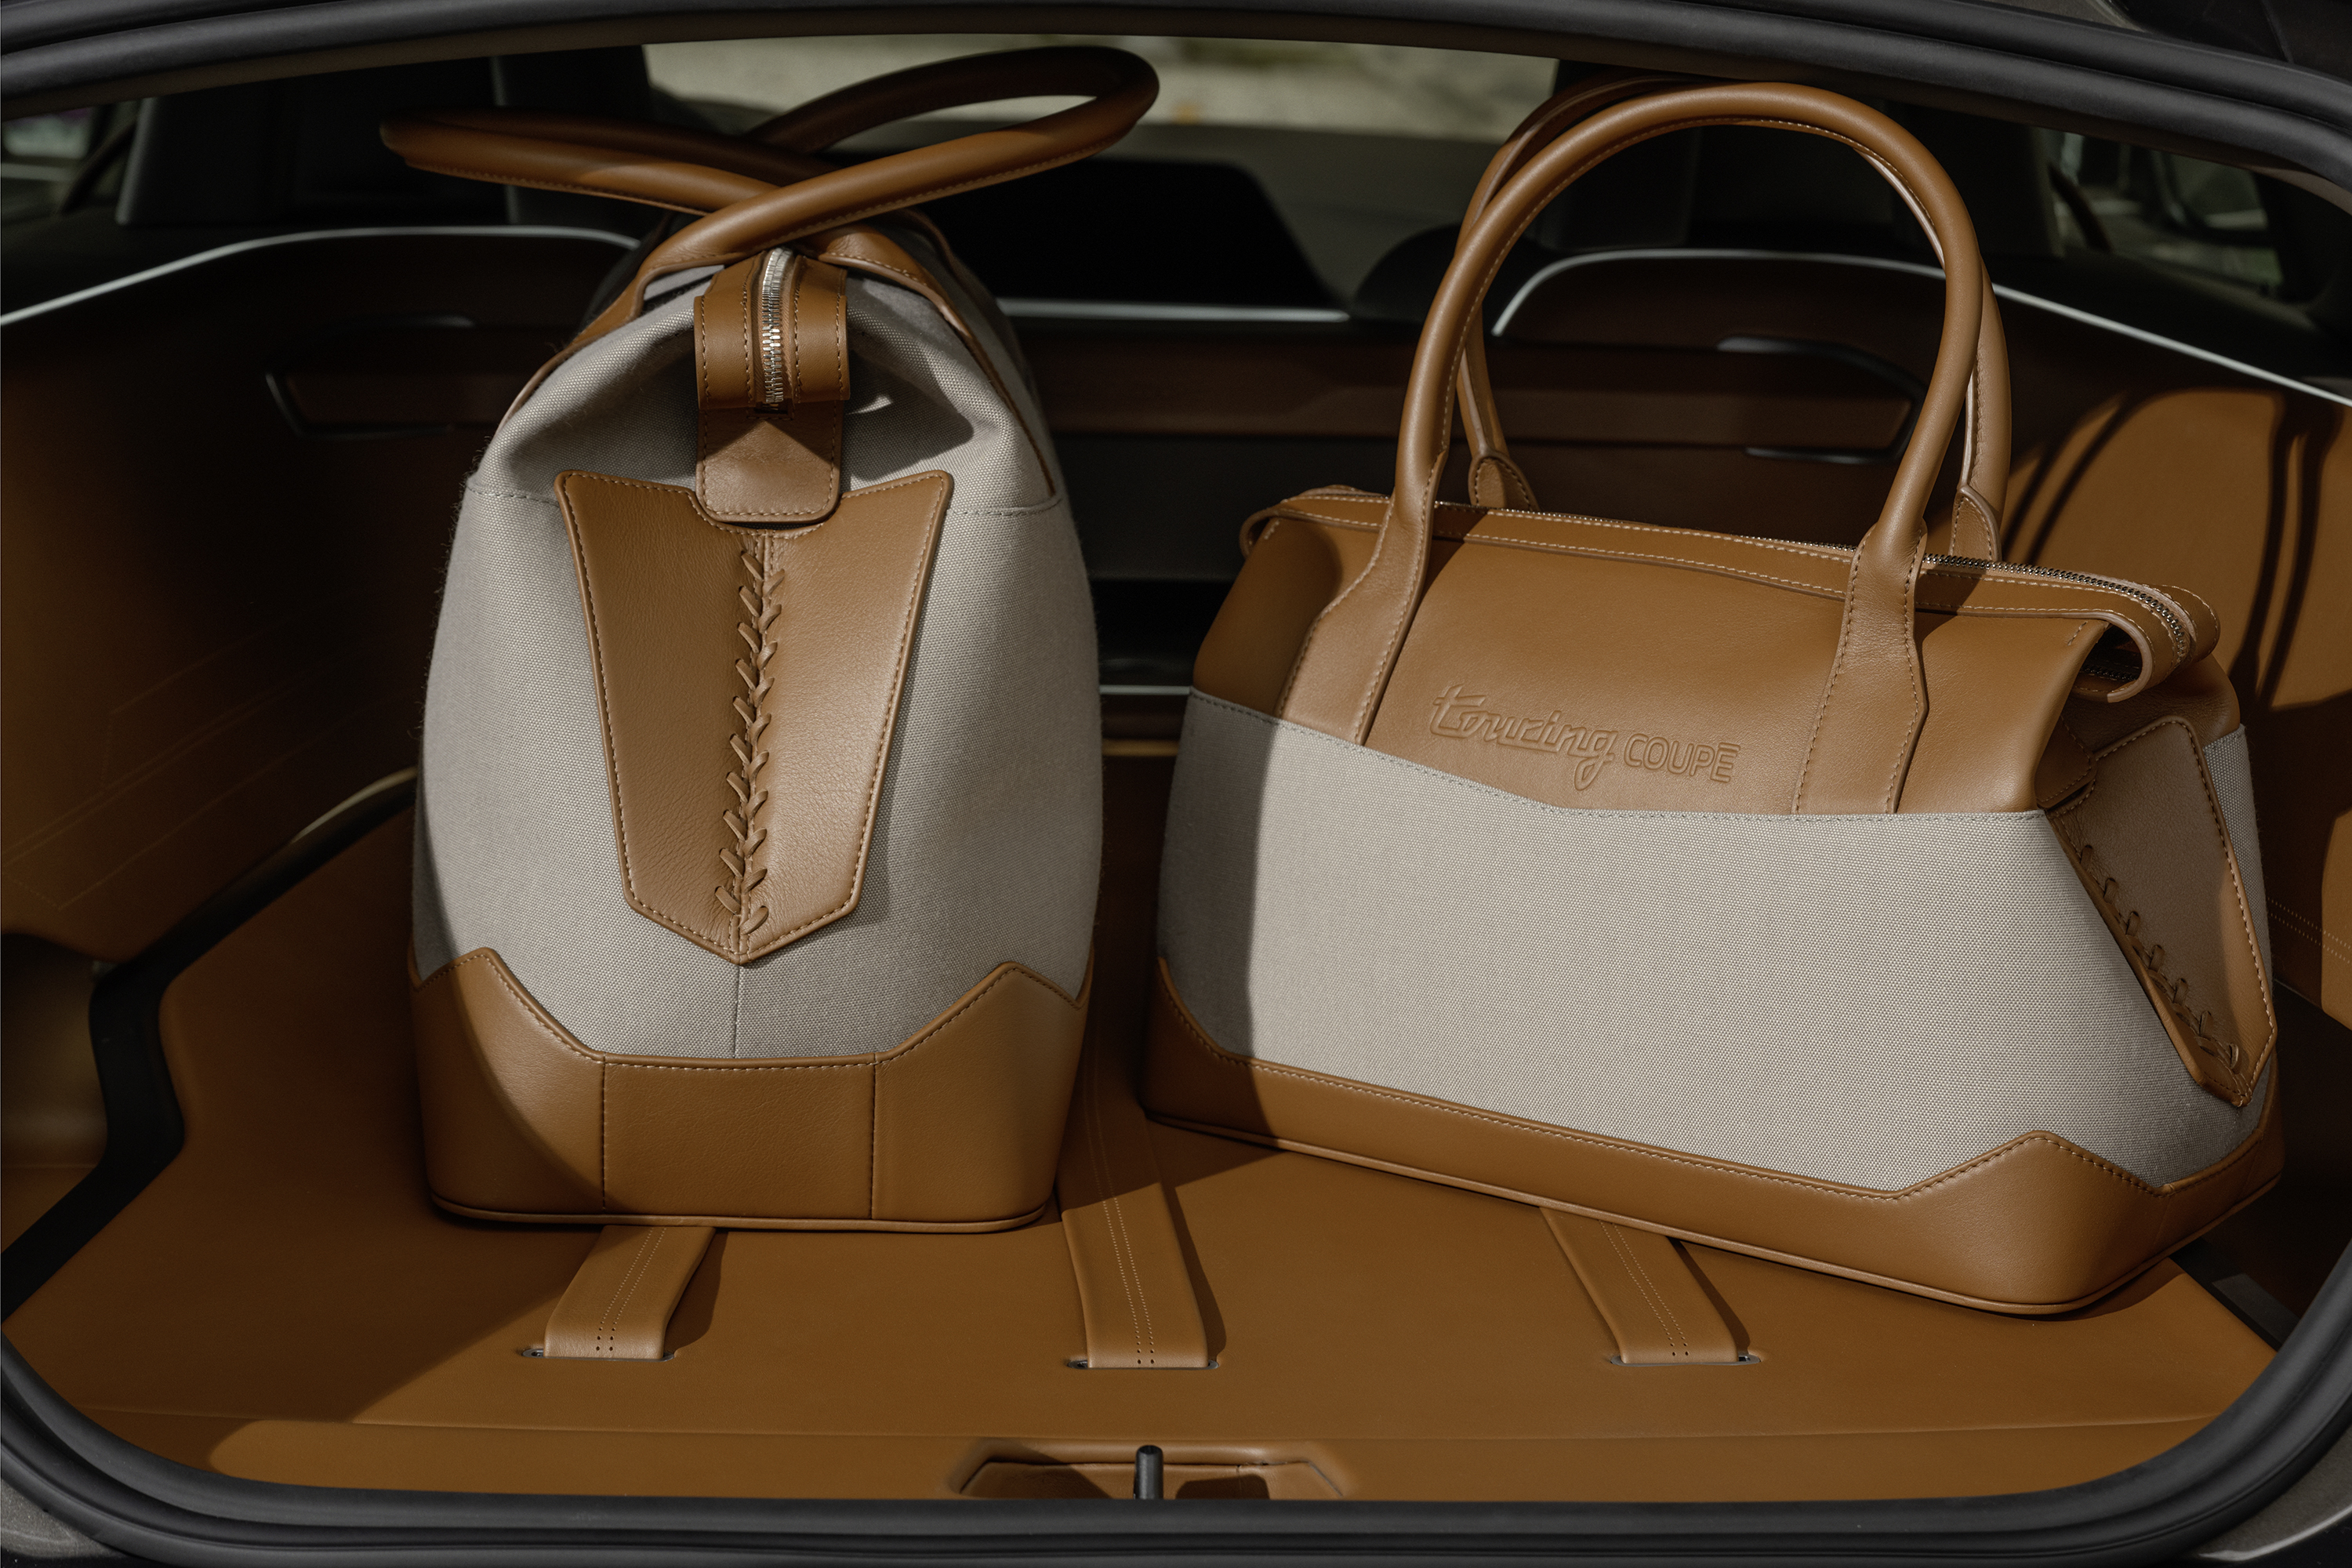 BMW Touring Coupe luggage.jpg